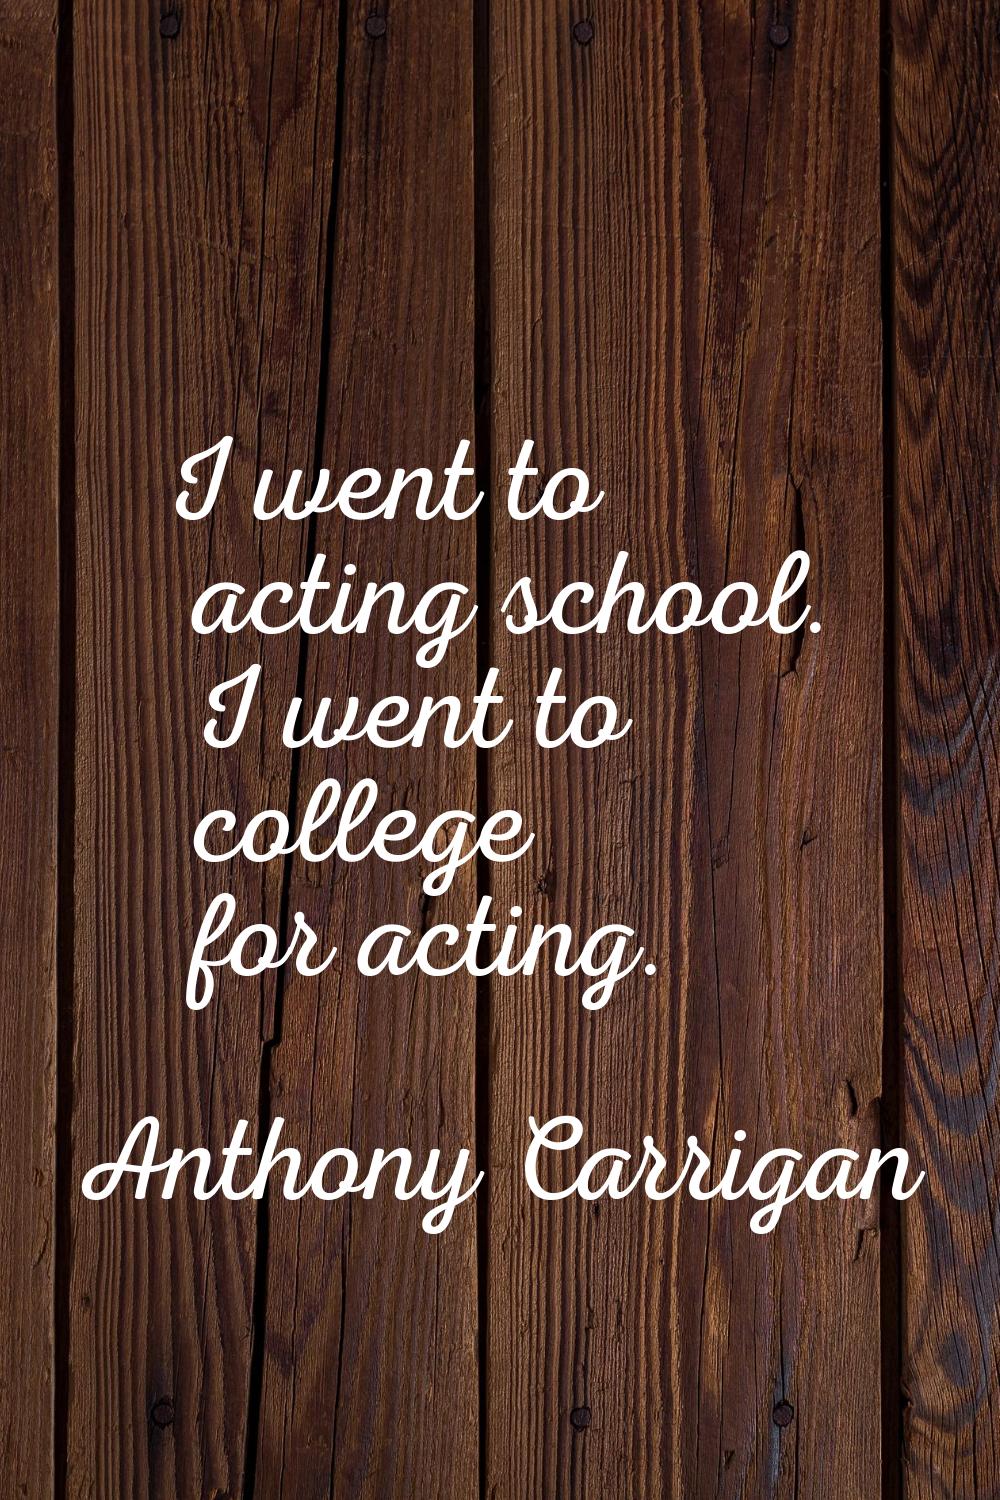 I went to acting school. I went to college for acting.